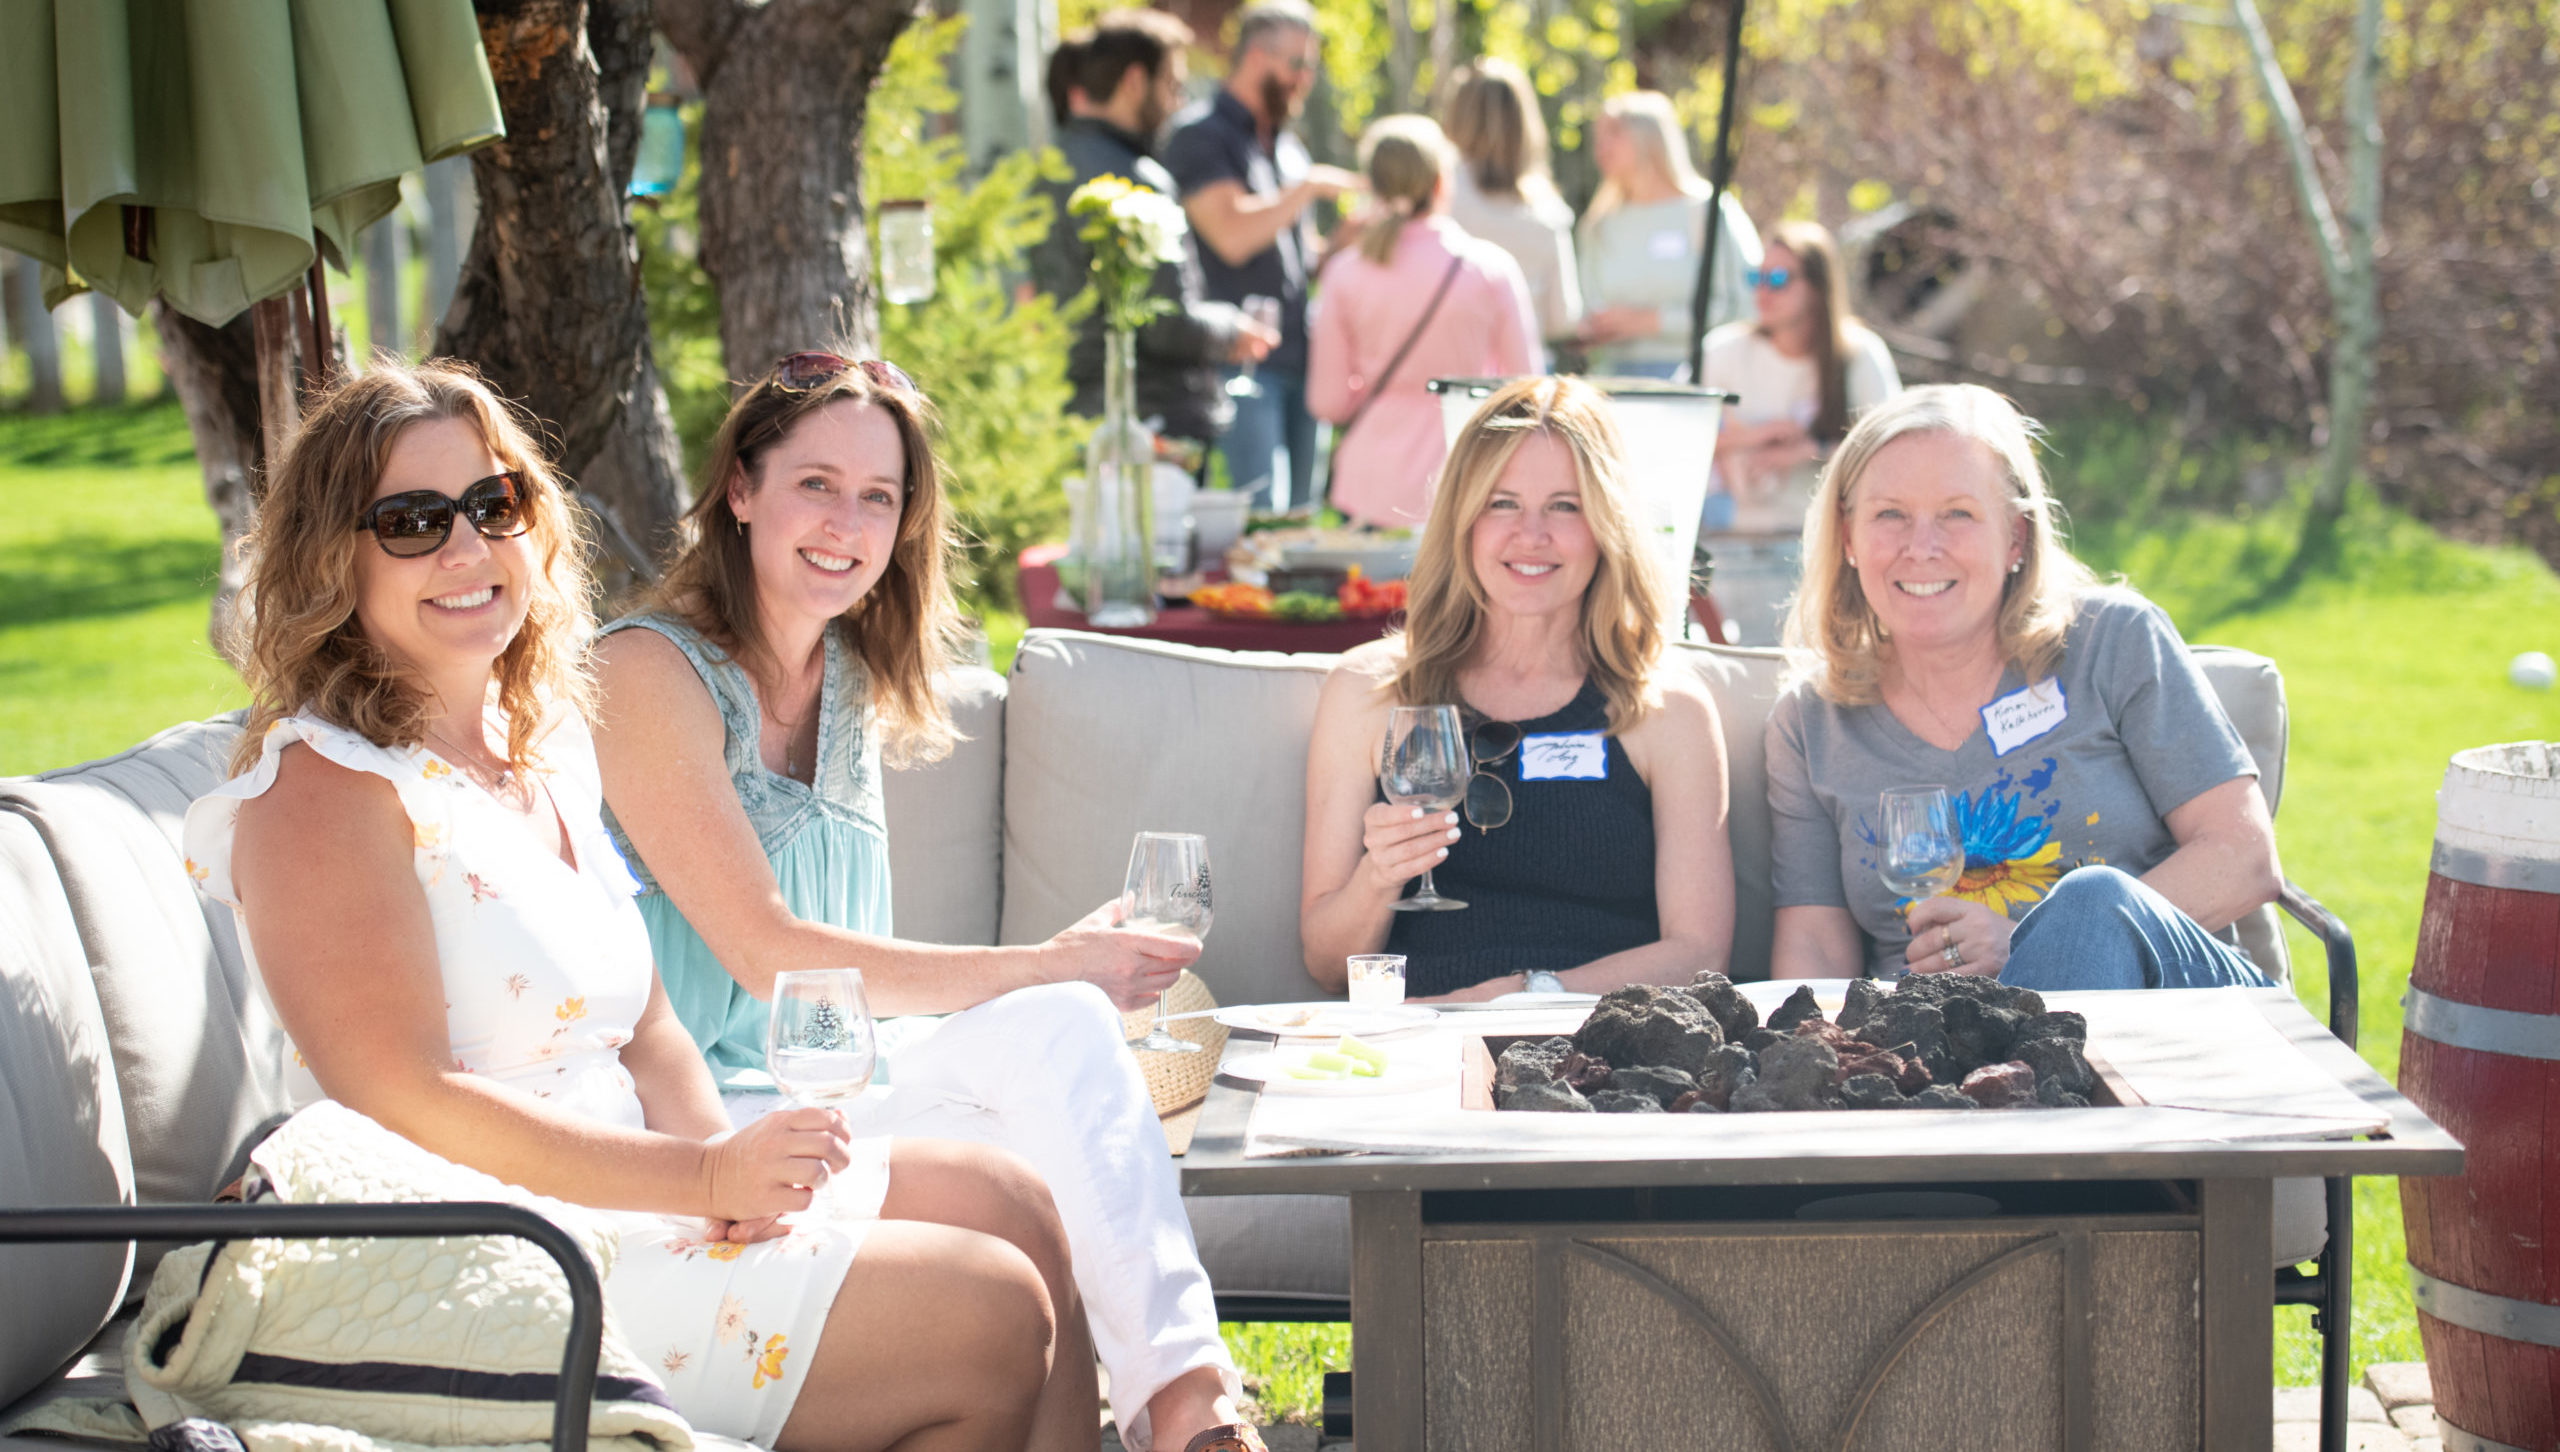 Check Out Photos from BIG LIFE CONNECTIONS: Wine Tasting at Truckee River Winery